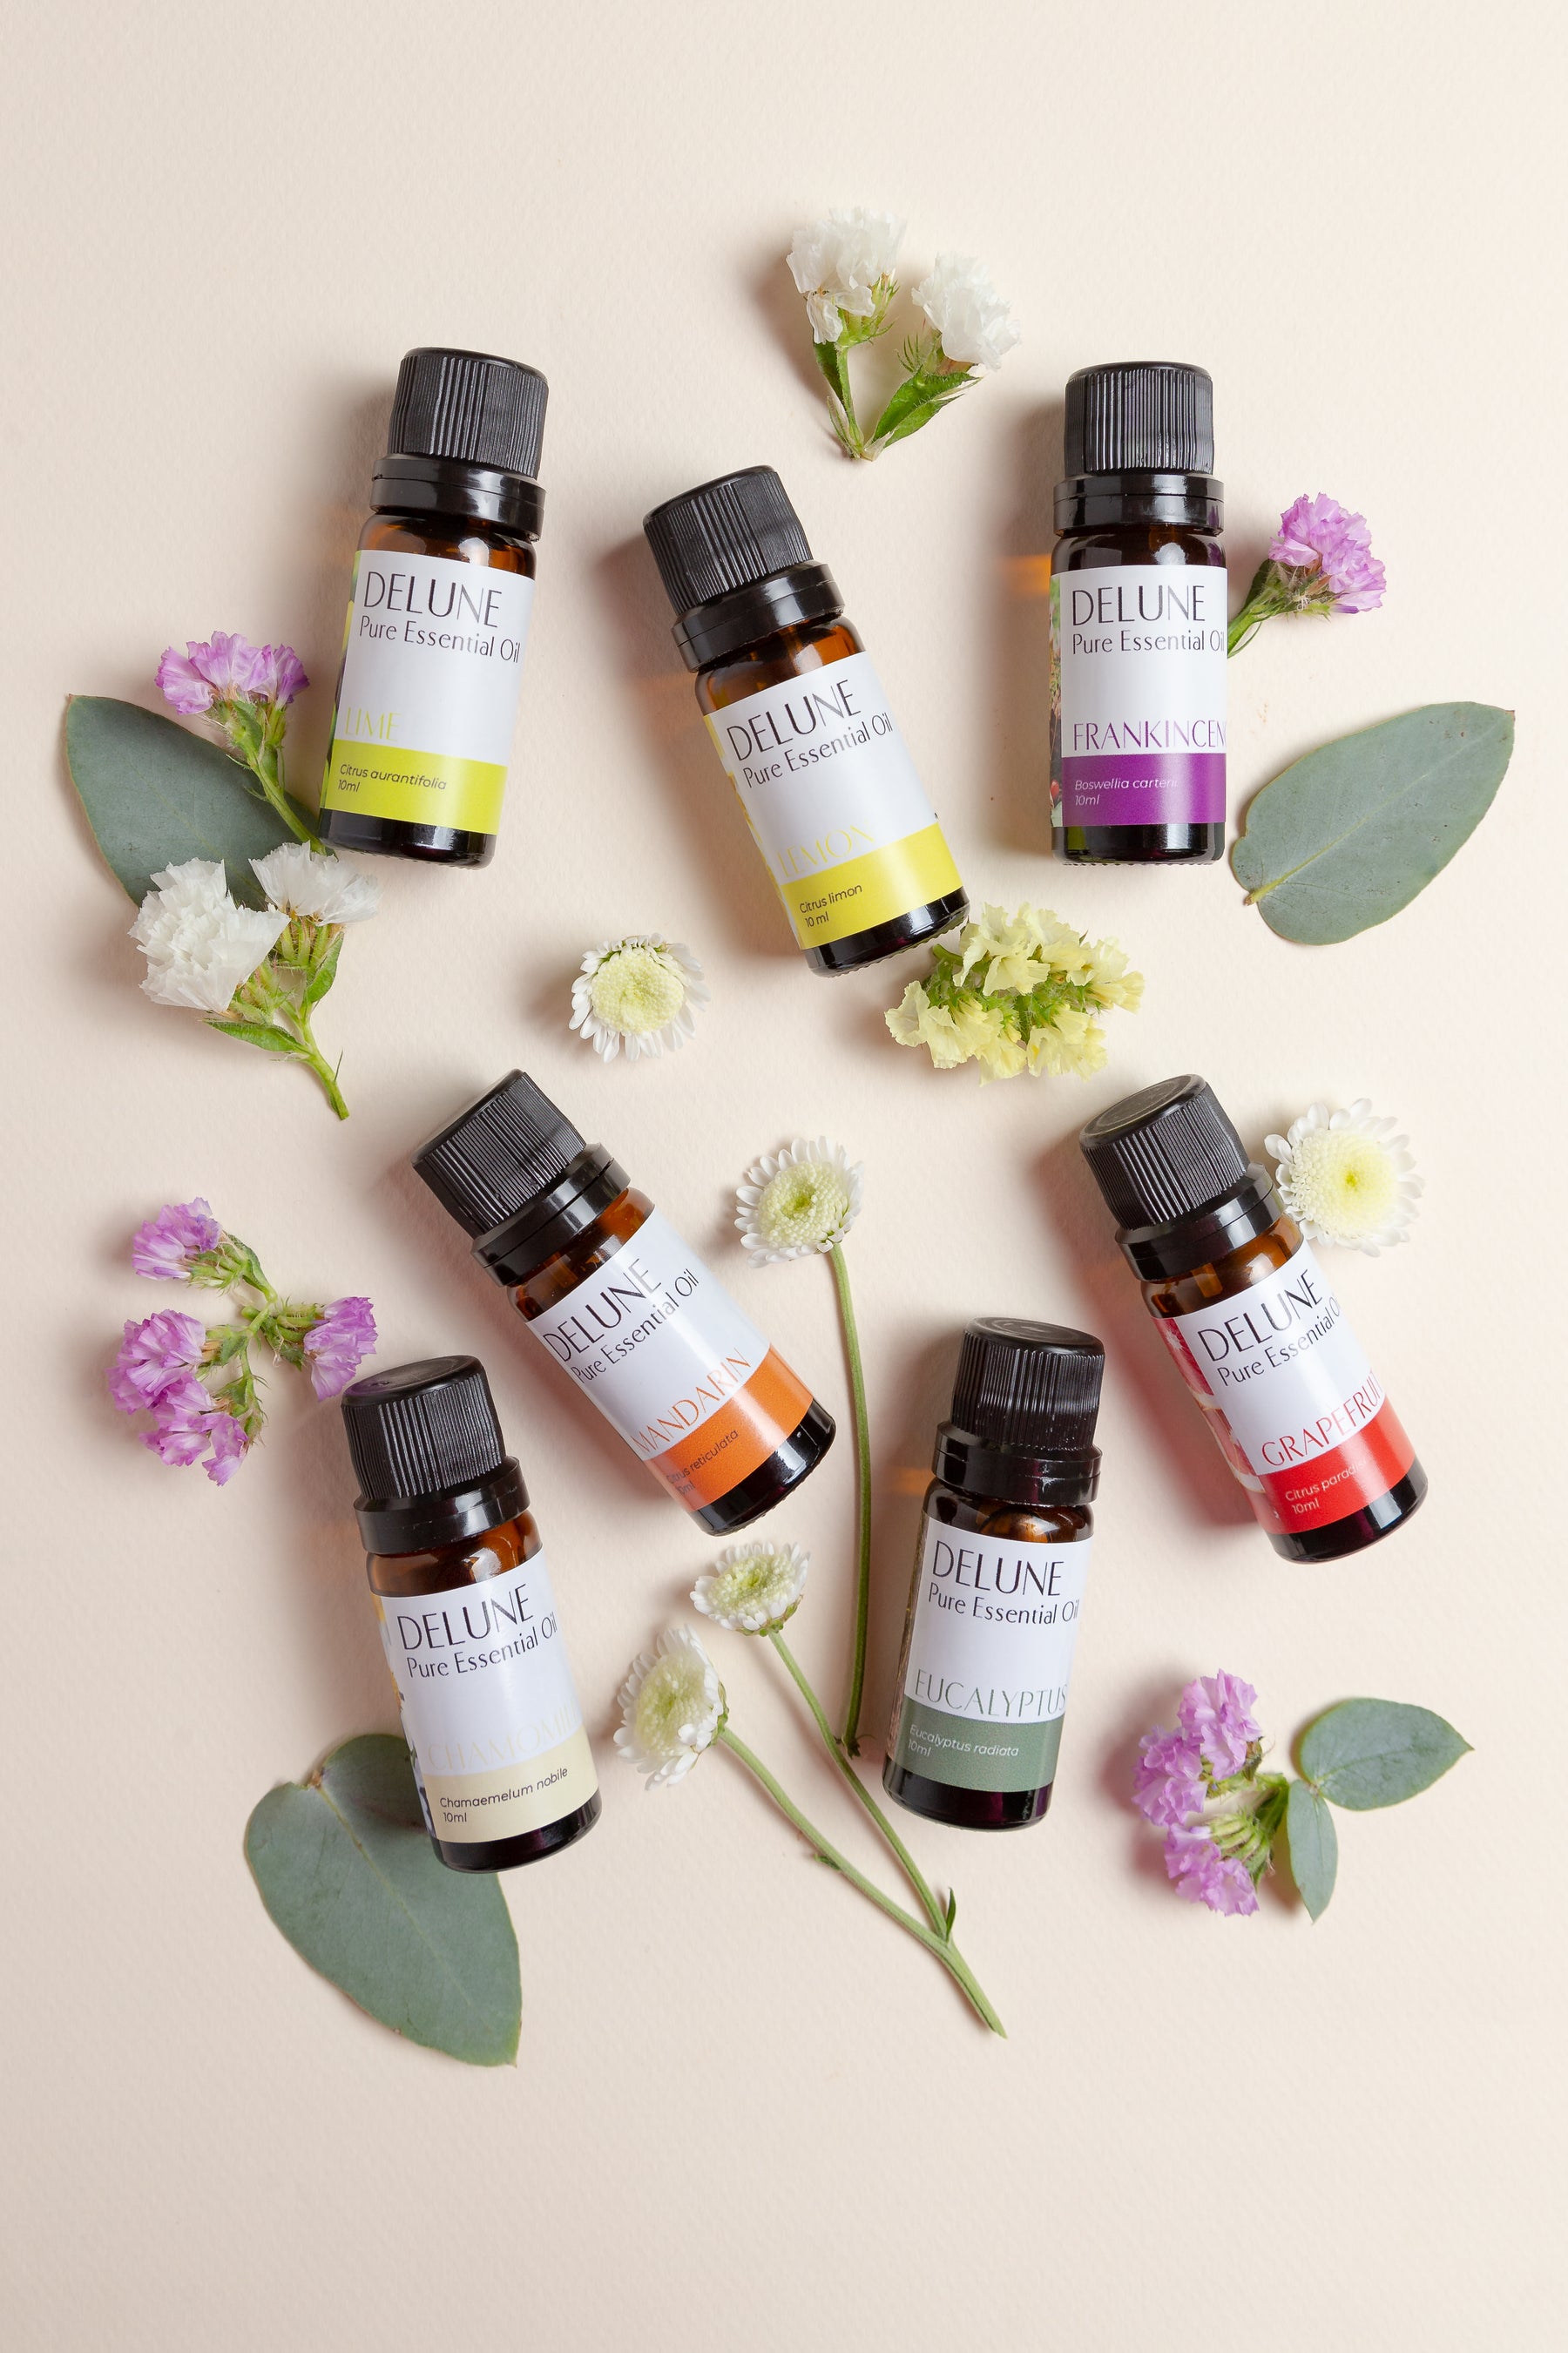 How to Use Pure Essential Oils Safely: Dosage, Dilution, and More